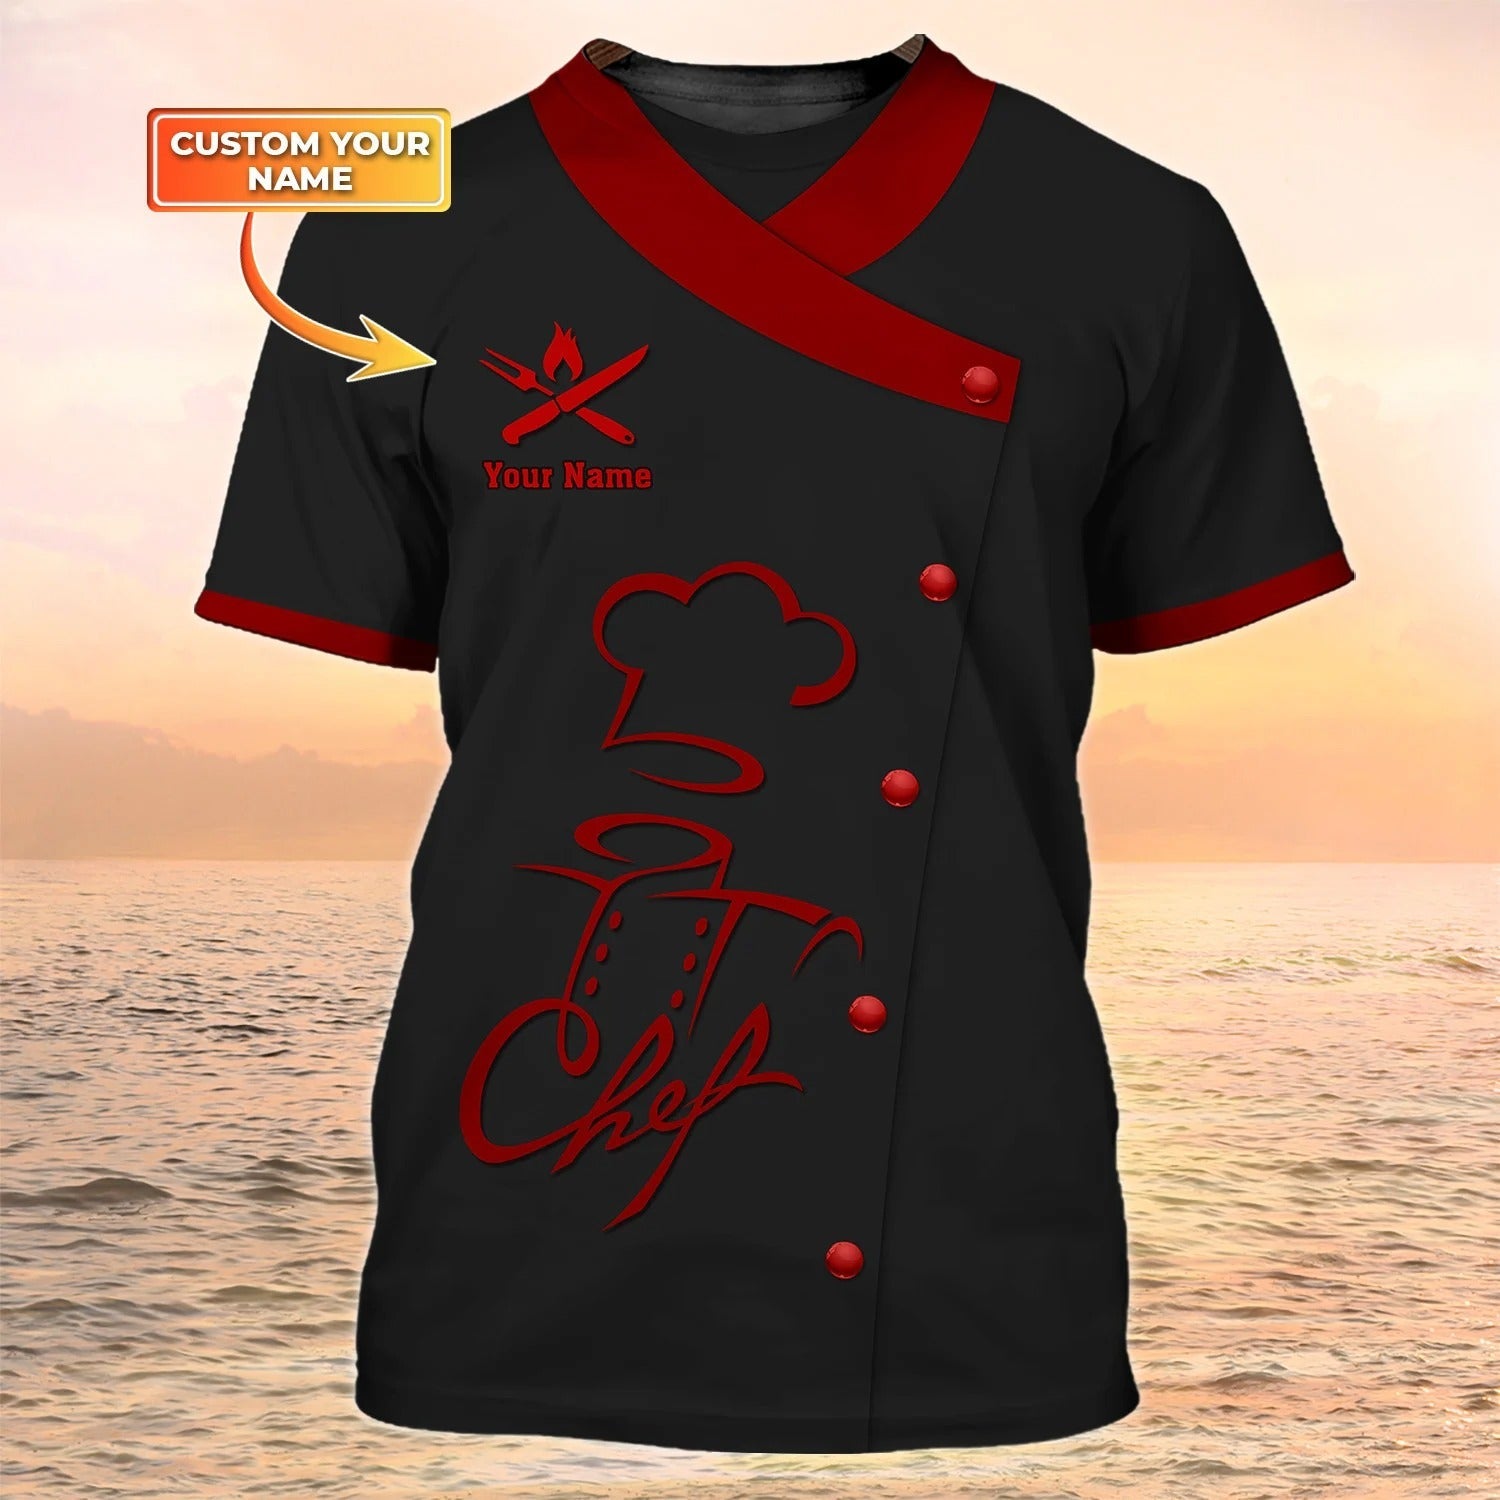 Master Chef Custom Shirt Chef Wear And Chef Clothing for Restaurants Chef Uniforms